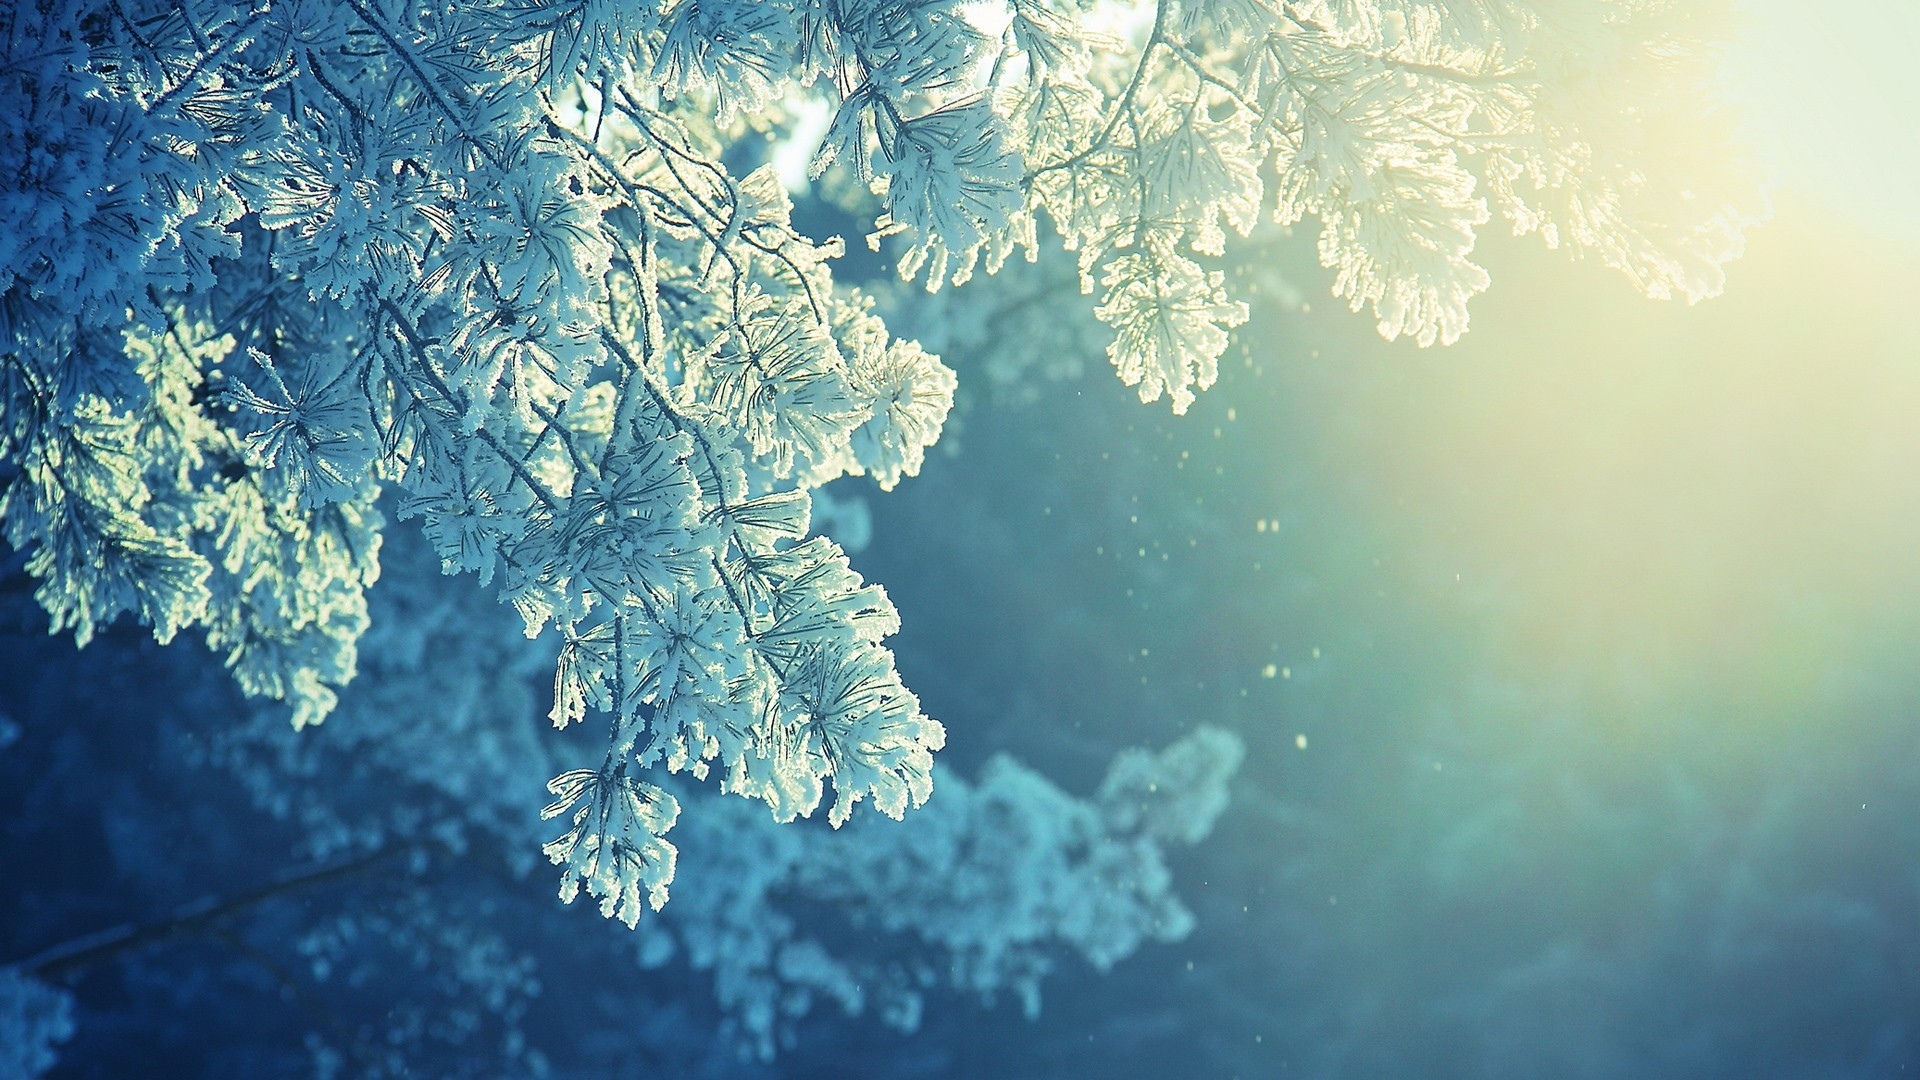 nature, Trees, Autumn, Fall, Winter, Snow, Frost, Sunlight, Light, Snowing, Flakes, Drops, Soft Wallpaper